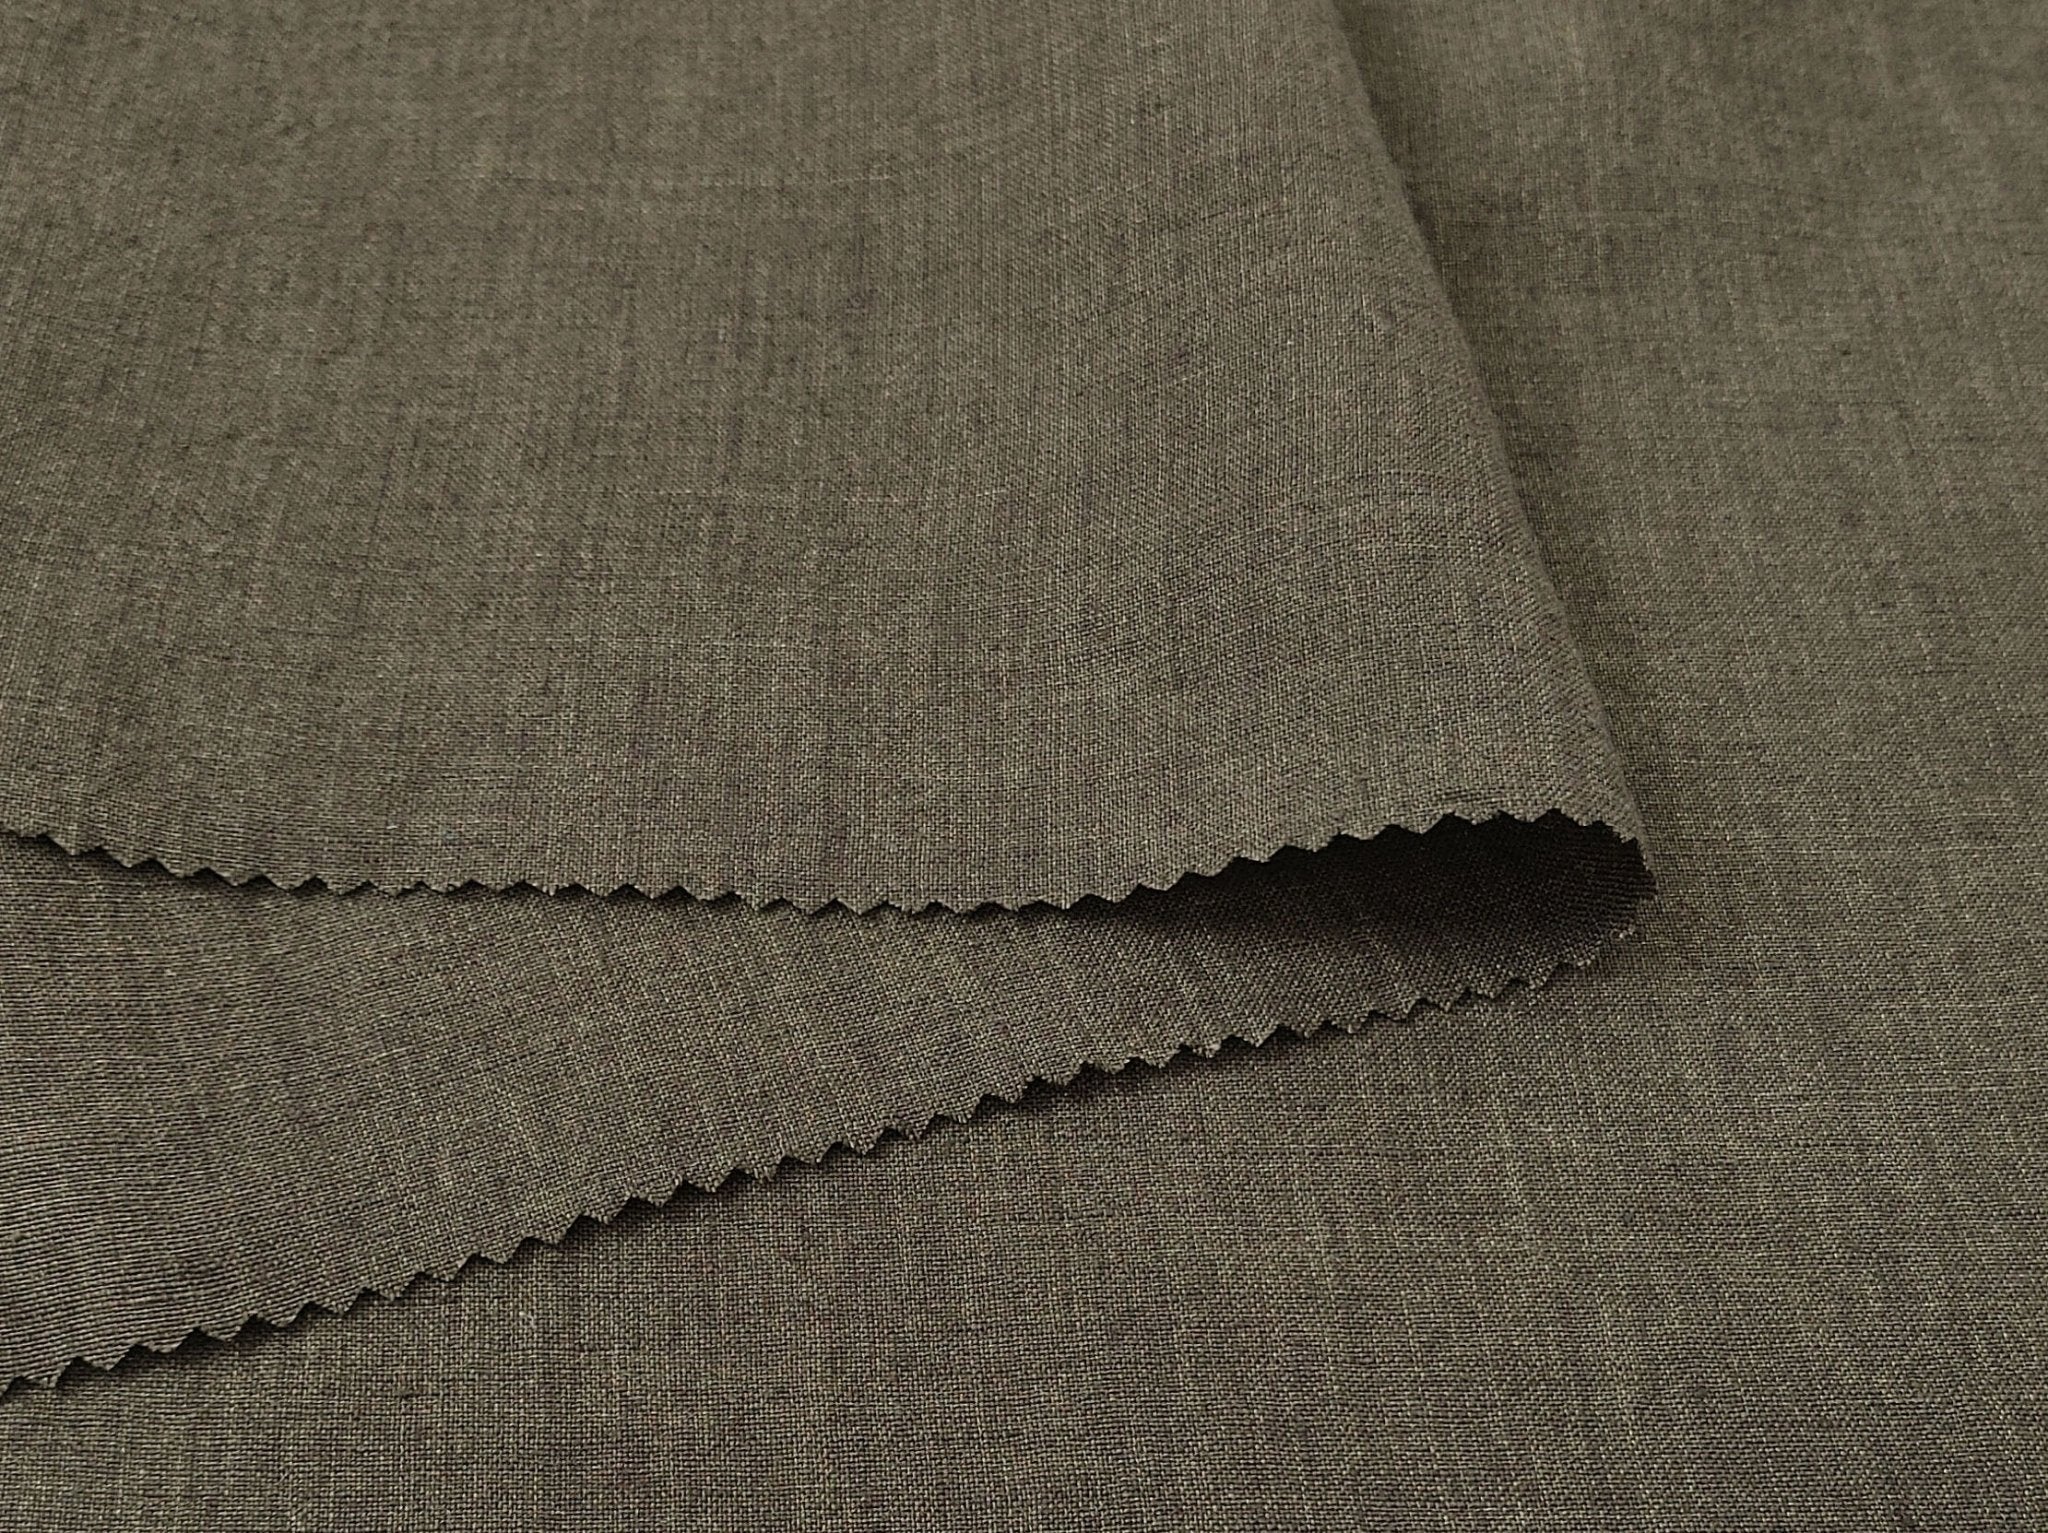 100% Linen Fabric: Delave High-Twisted Linen 14s, Medium Weight, New for 2024, 7712 7713 7682 - The Linen Lab - Khaki(Dark)